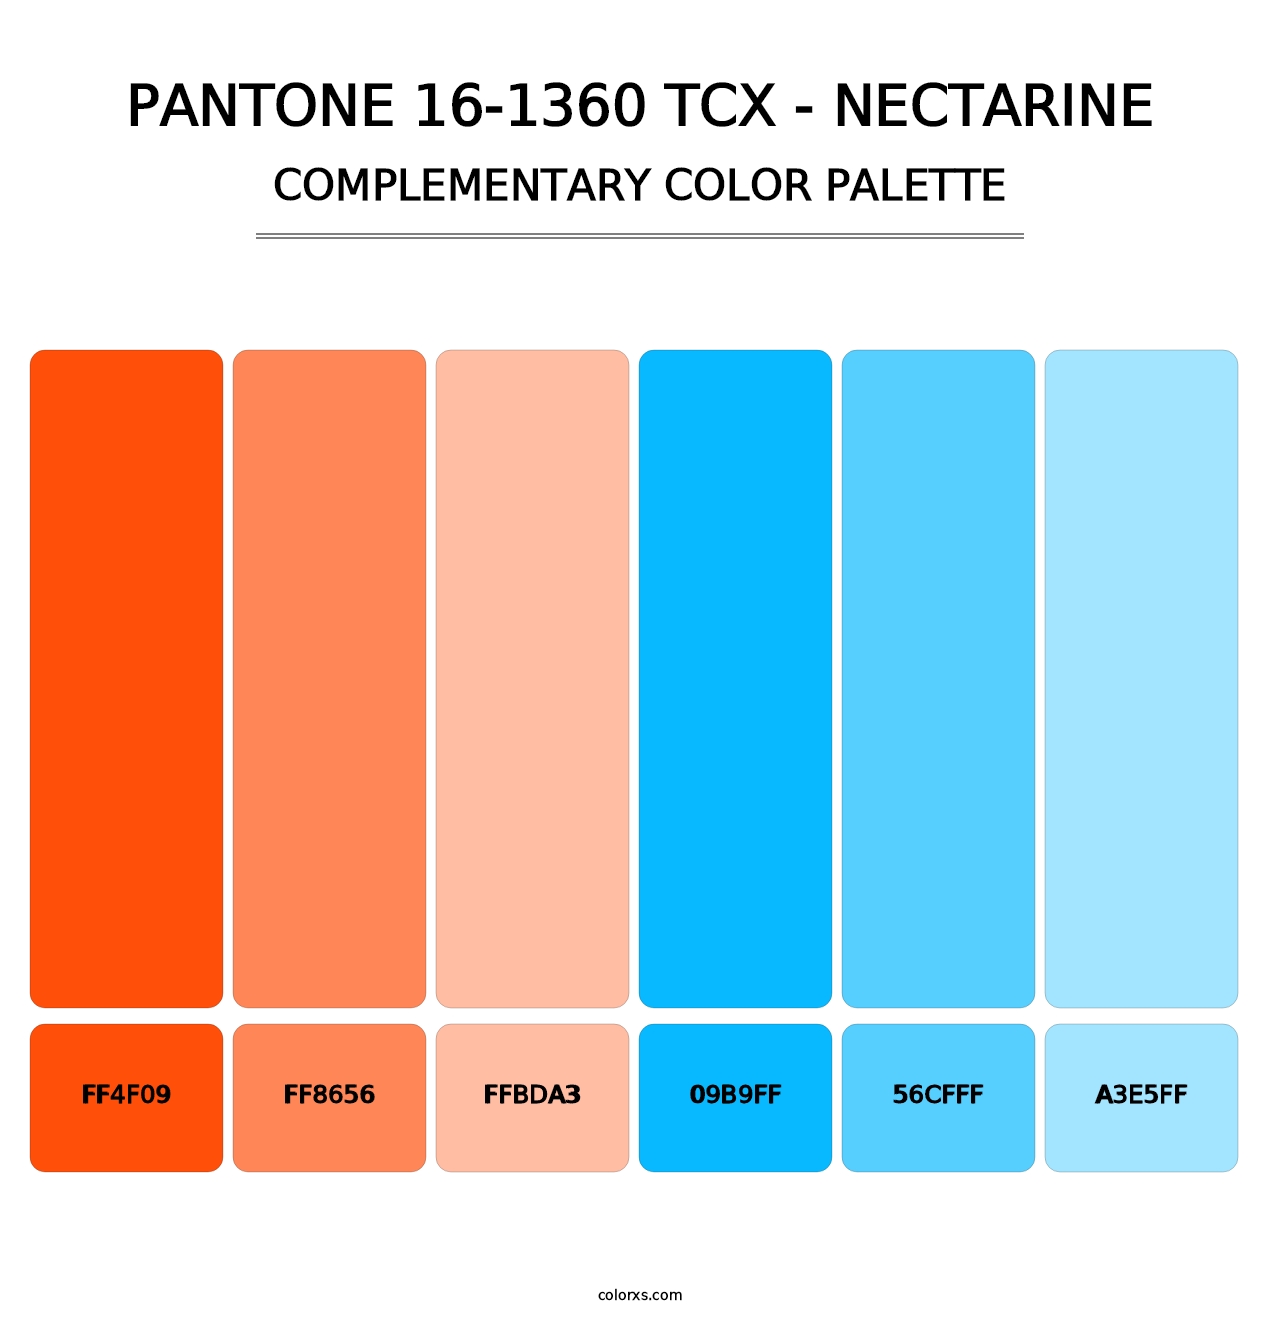 PANTONE 16-1360 TCX - Nectarine - Complementary Color Palette